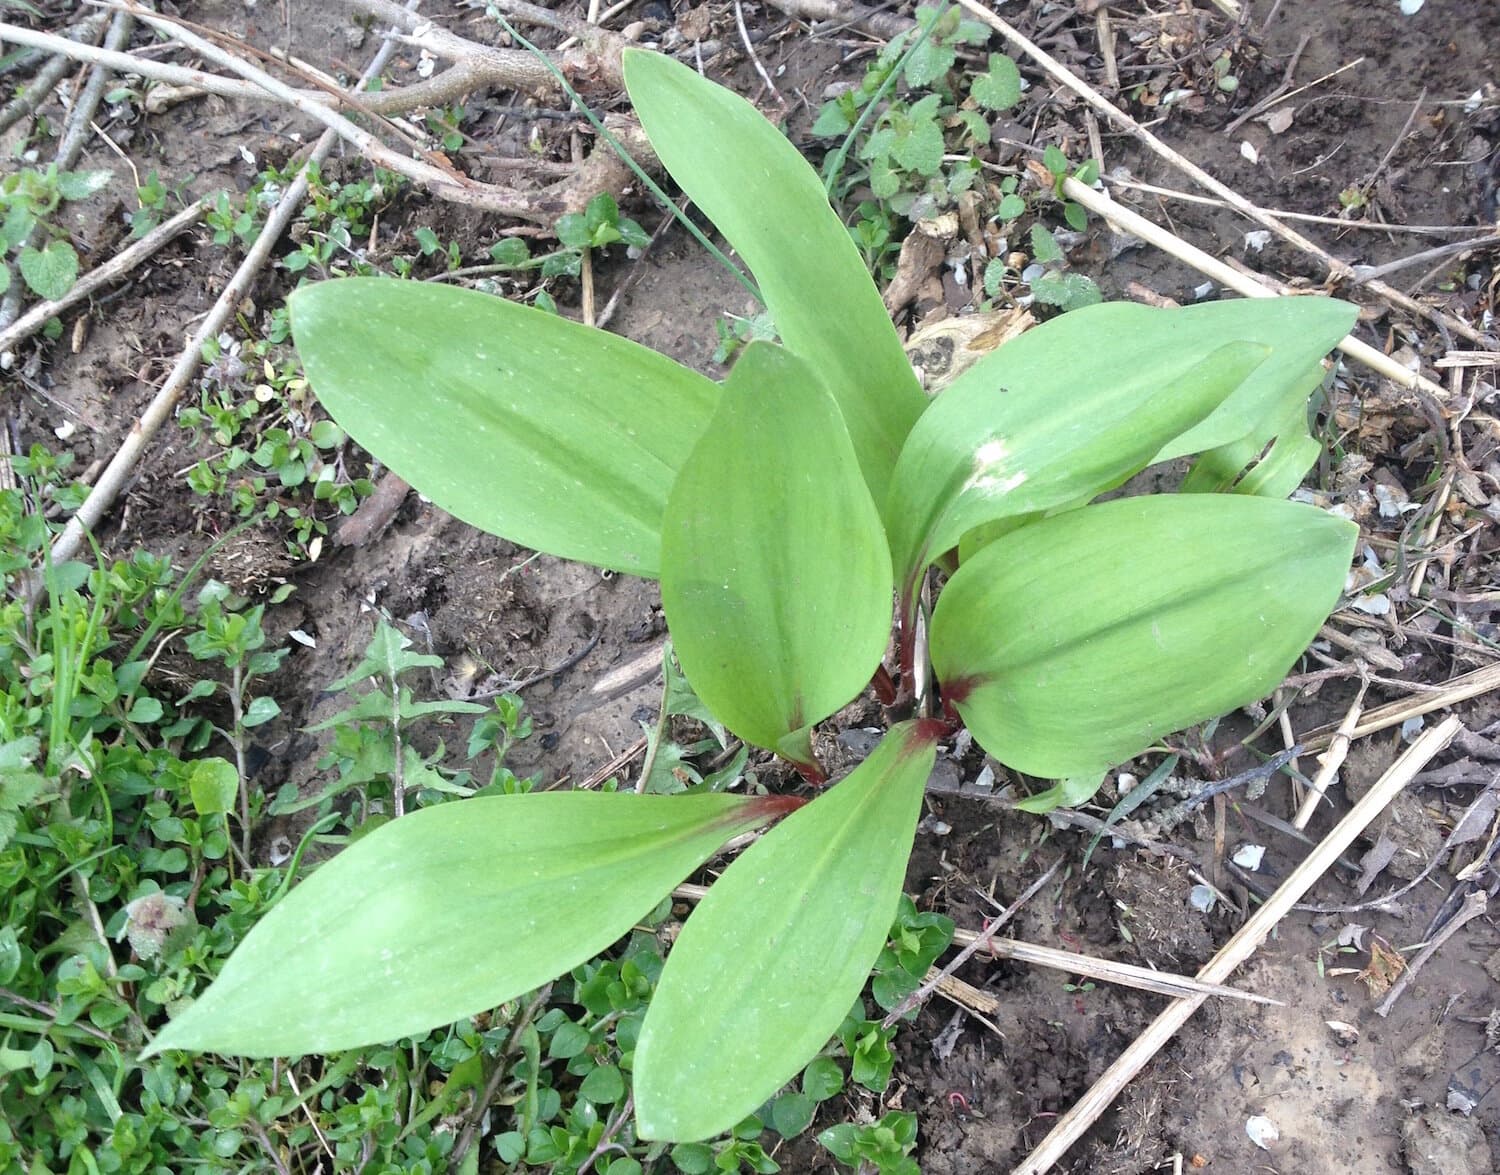 Wild ramps pop up in clusters like this all across the Eastern U.S. in late winter and early spring.